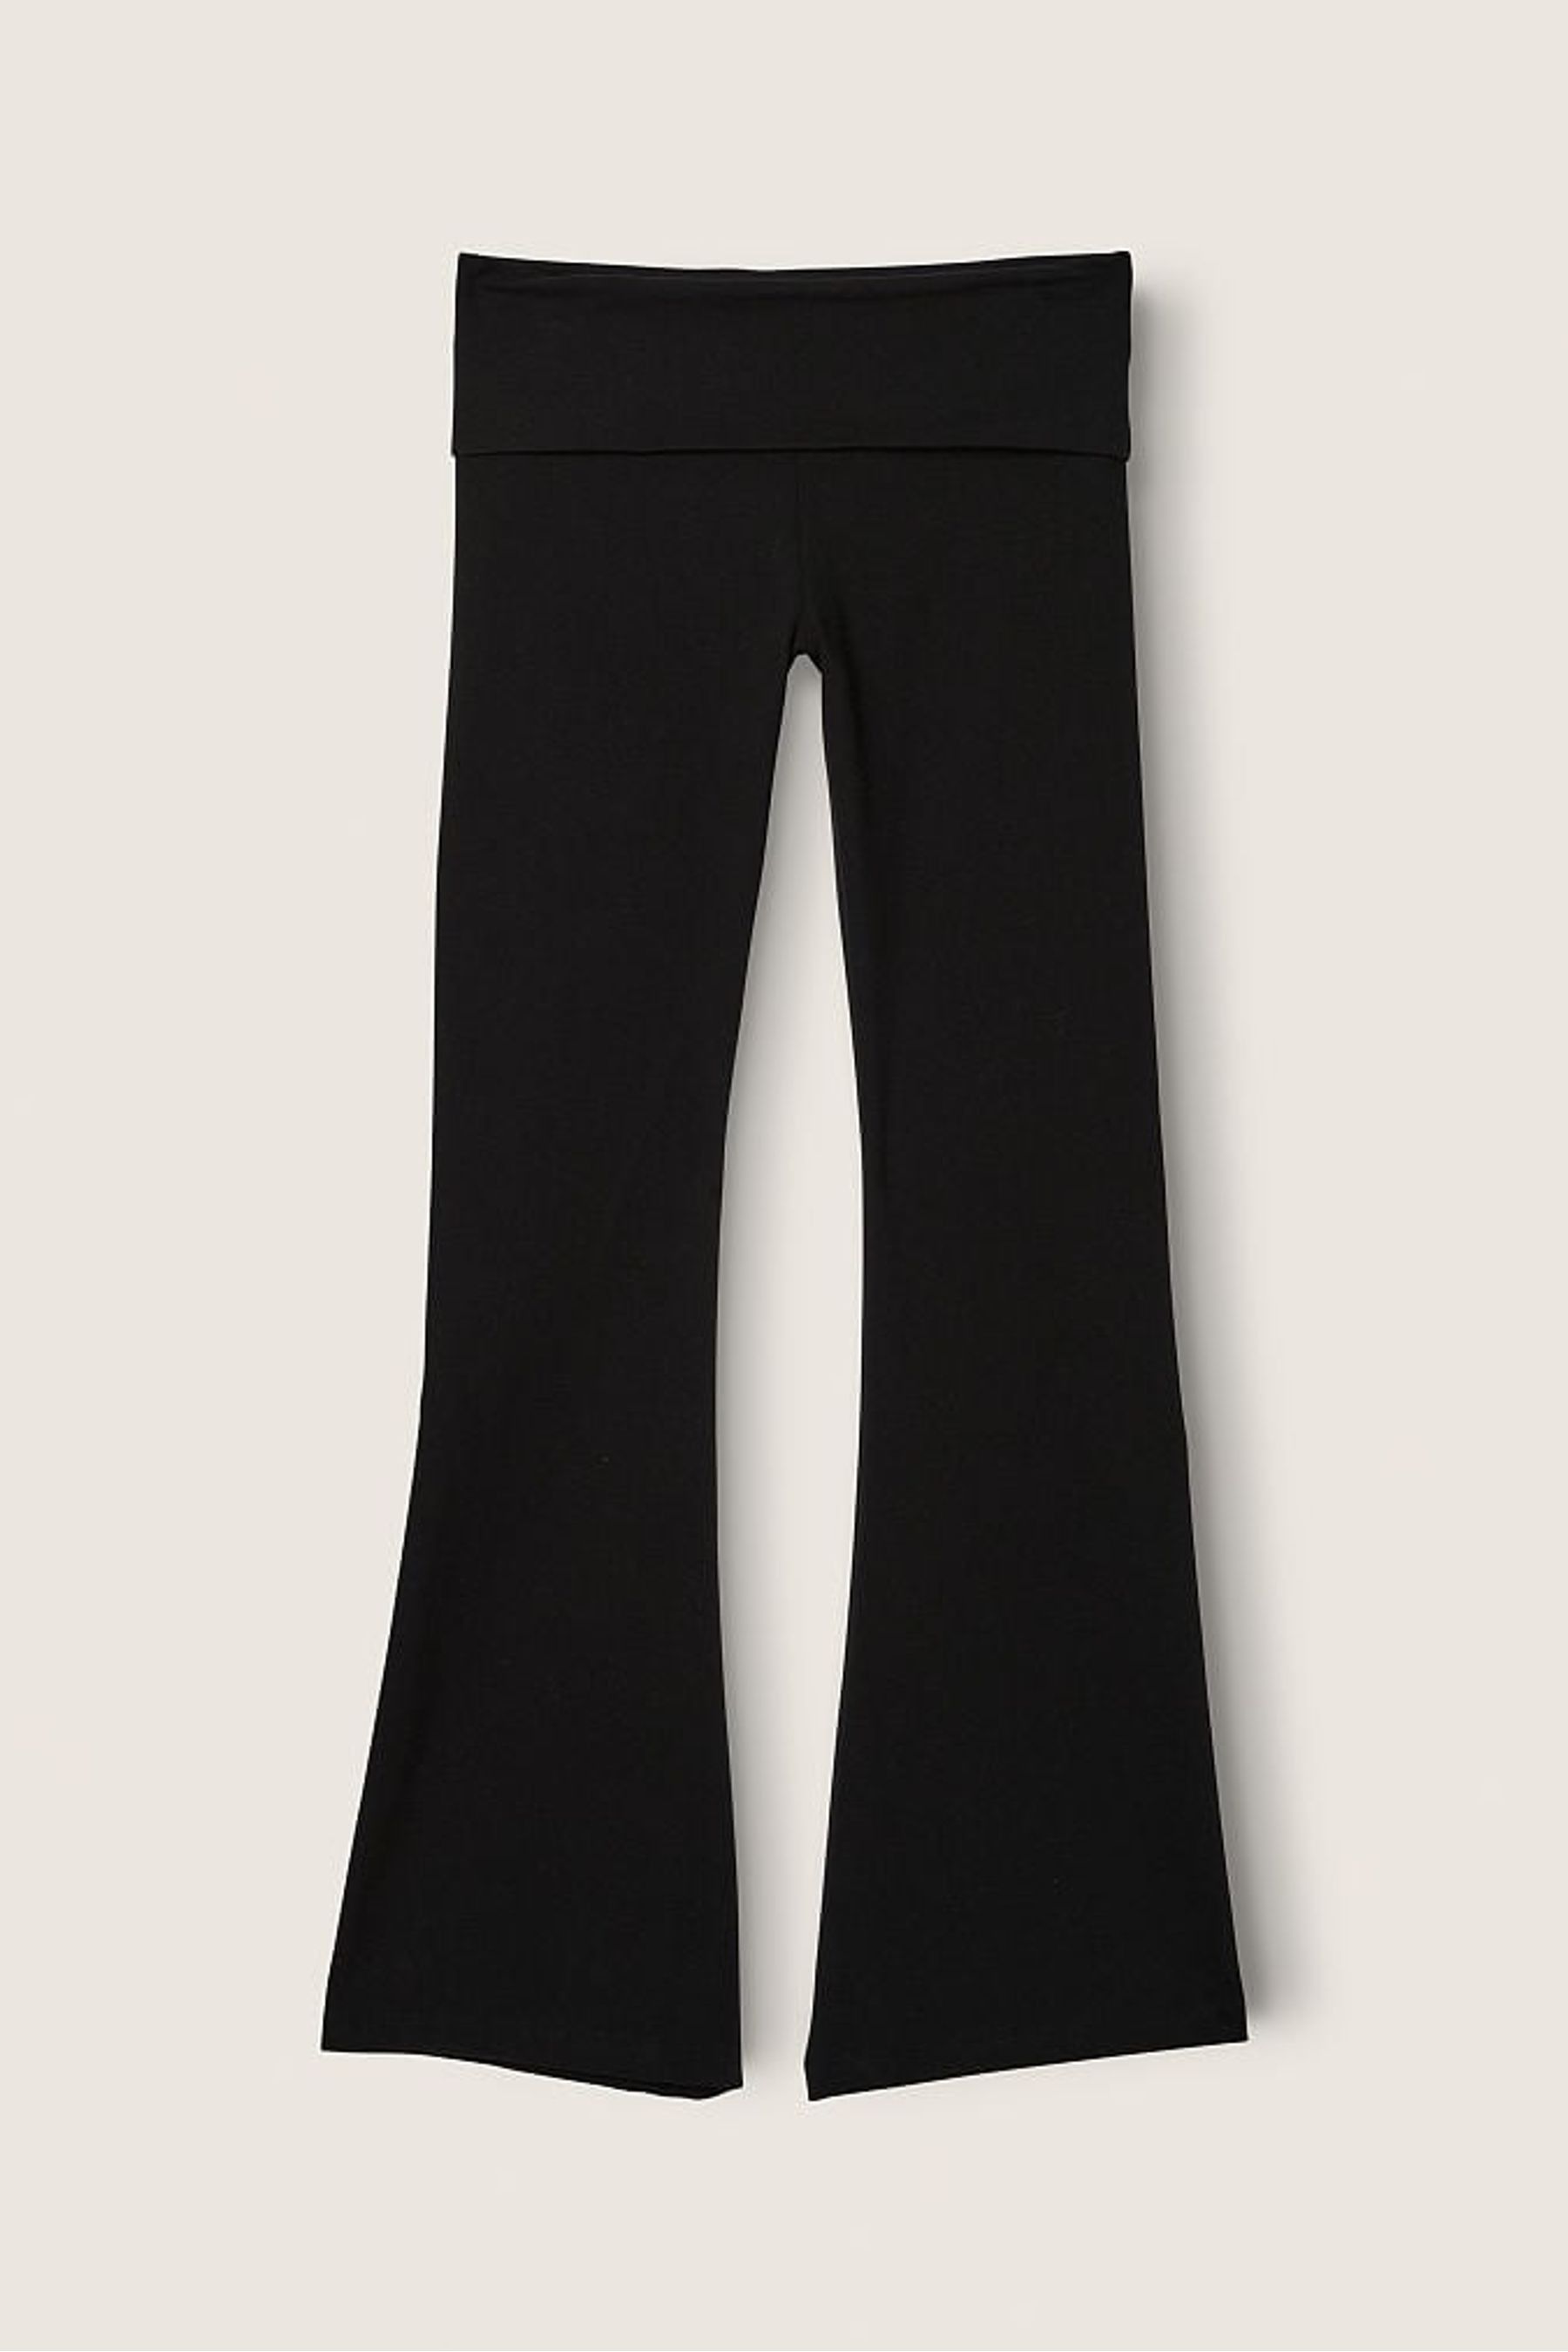 Buy Victoria's Secret PINK Cotton Foldover Flare Leggings from the ...